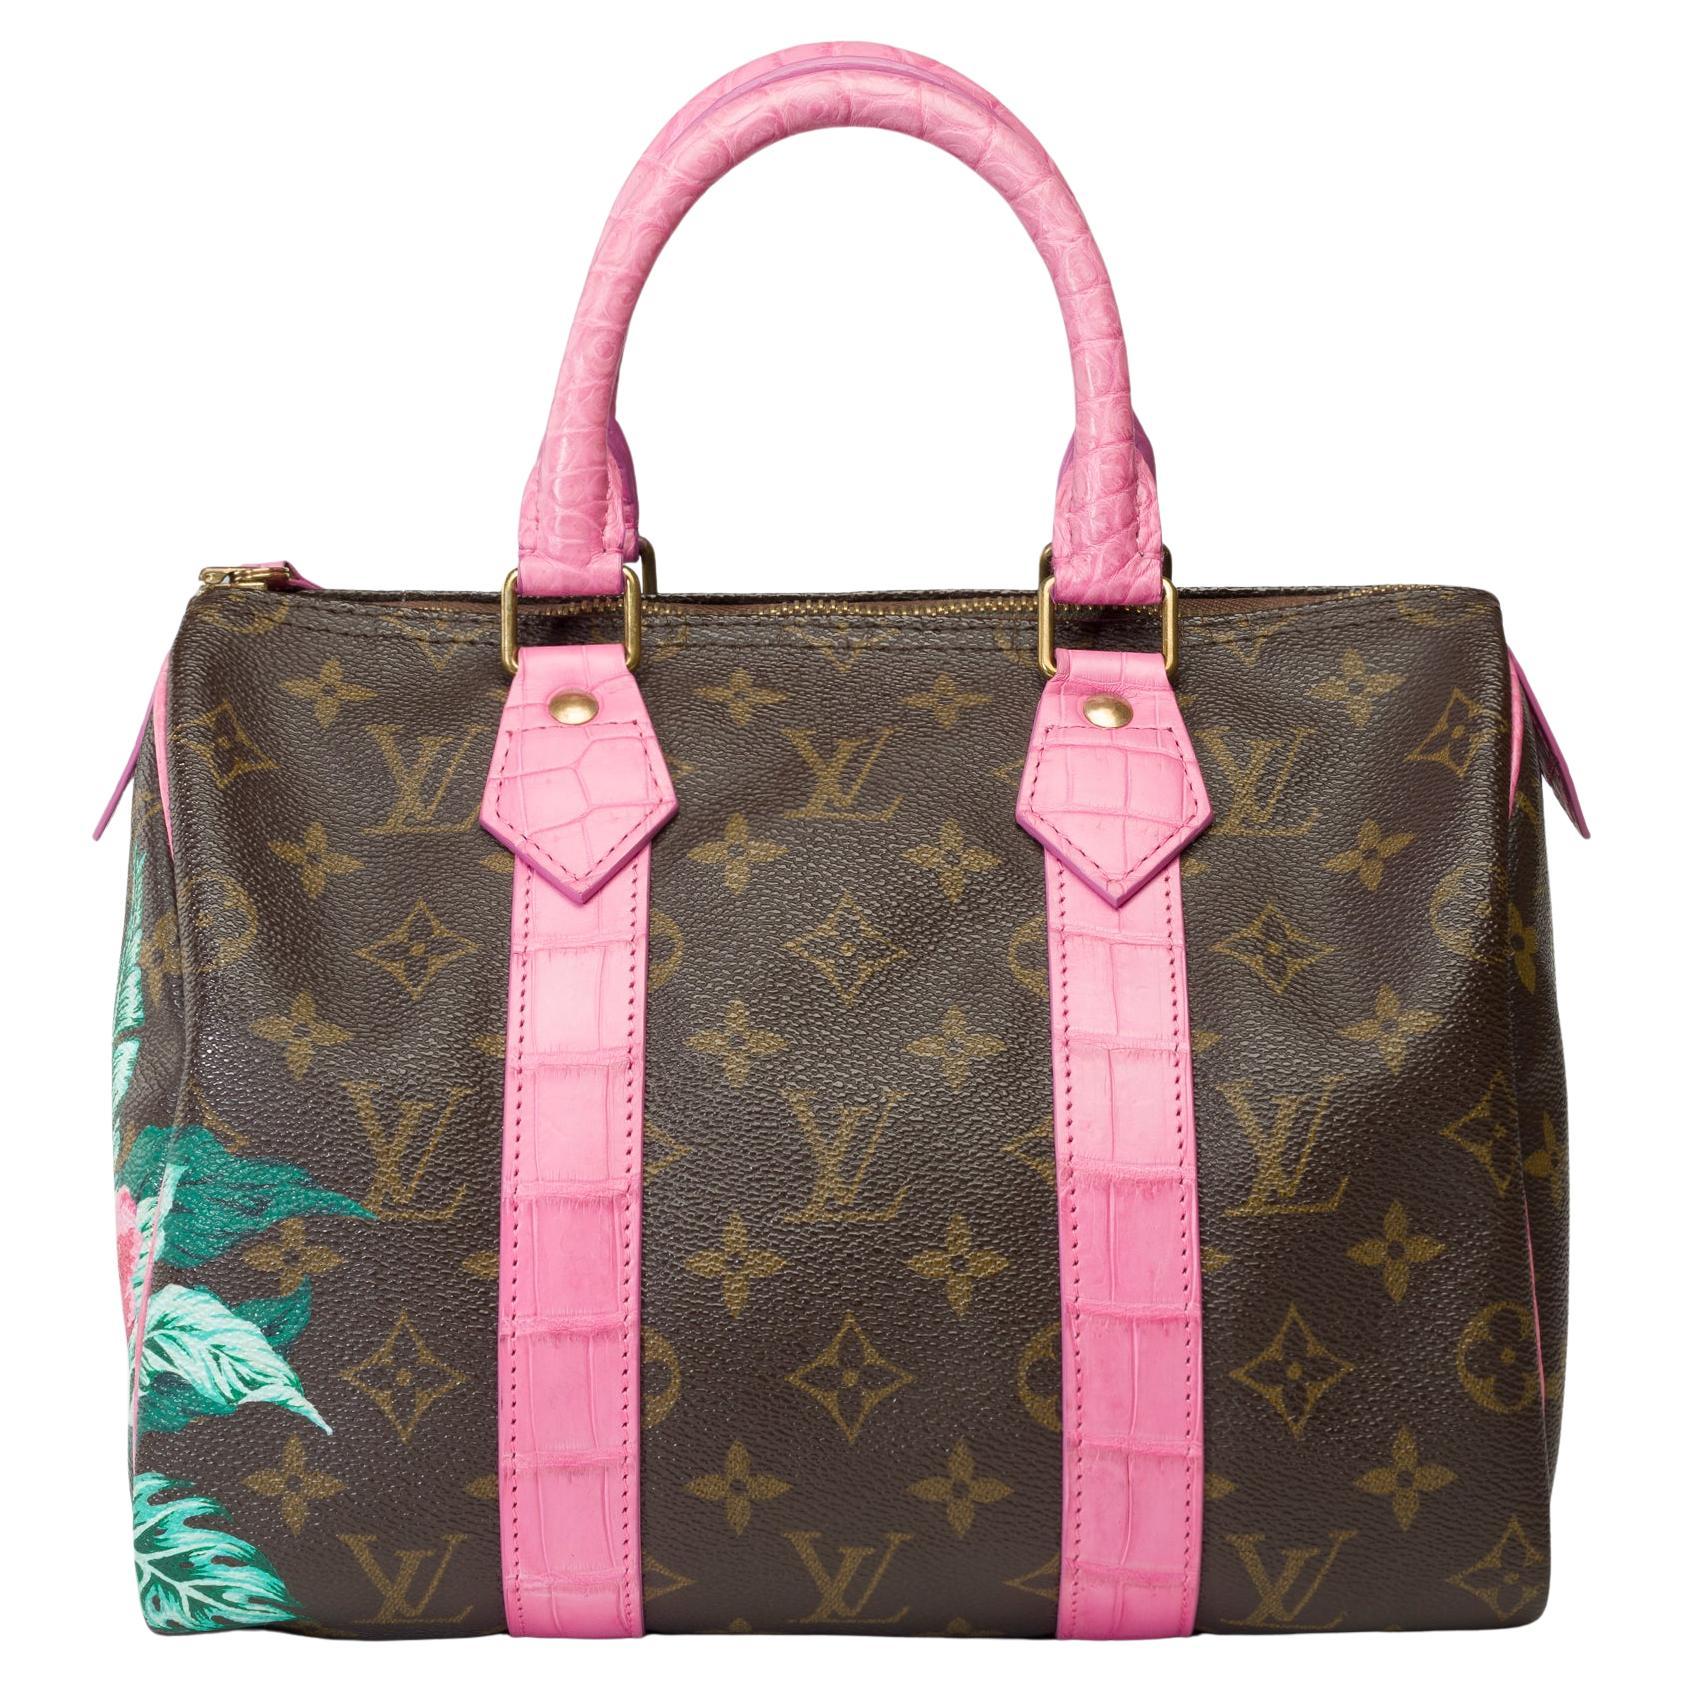 Customized Louis Vuitton Speedy 25 handbag Flowers with Pink Crocodile leather For Sale